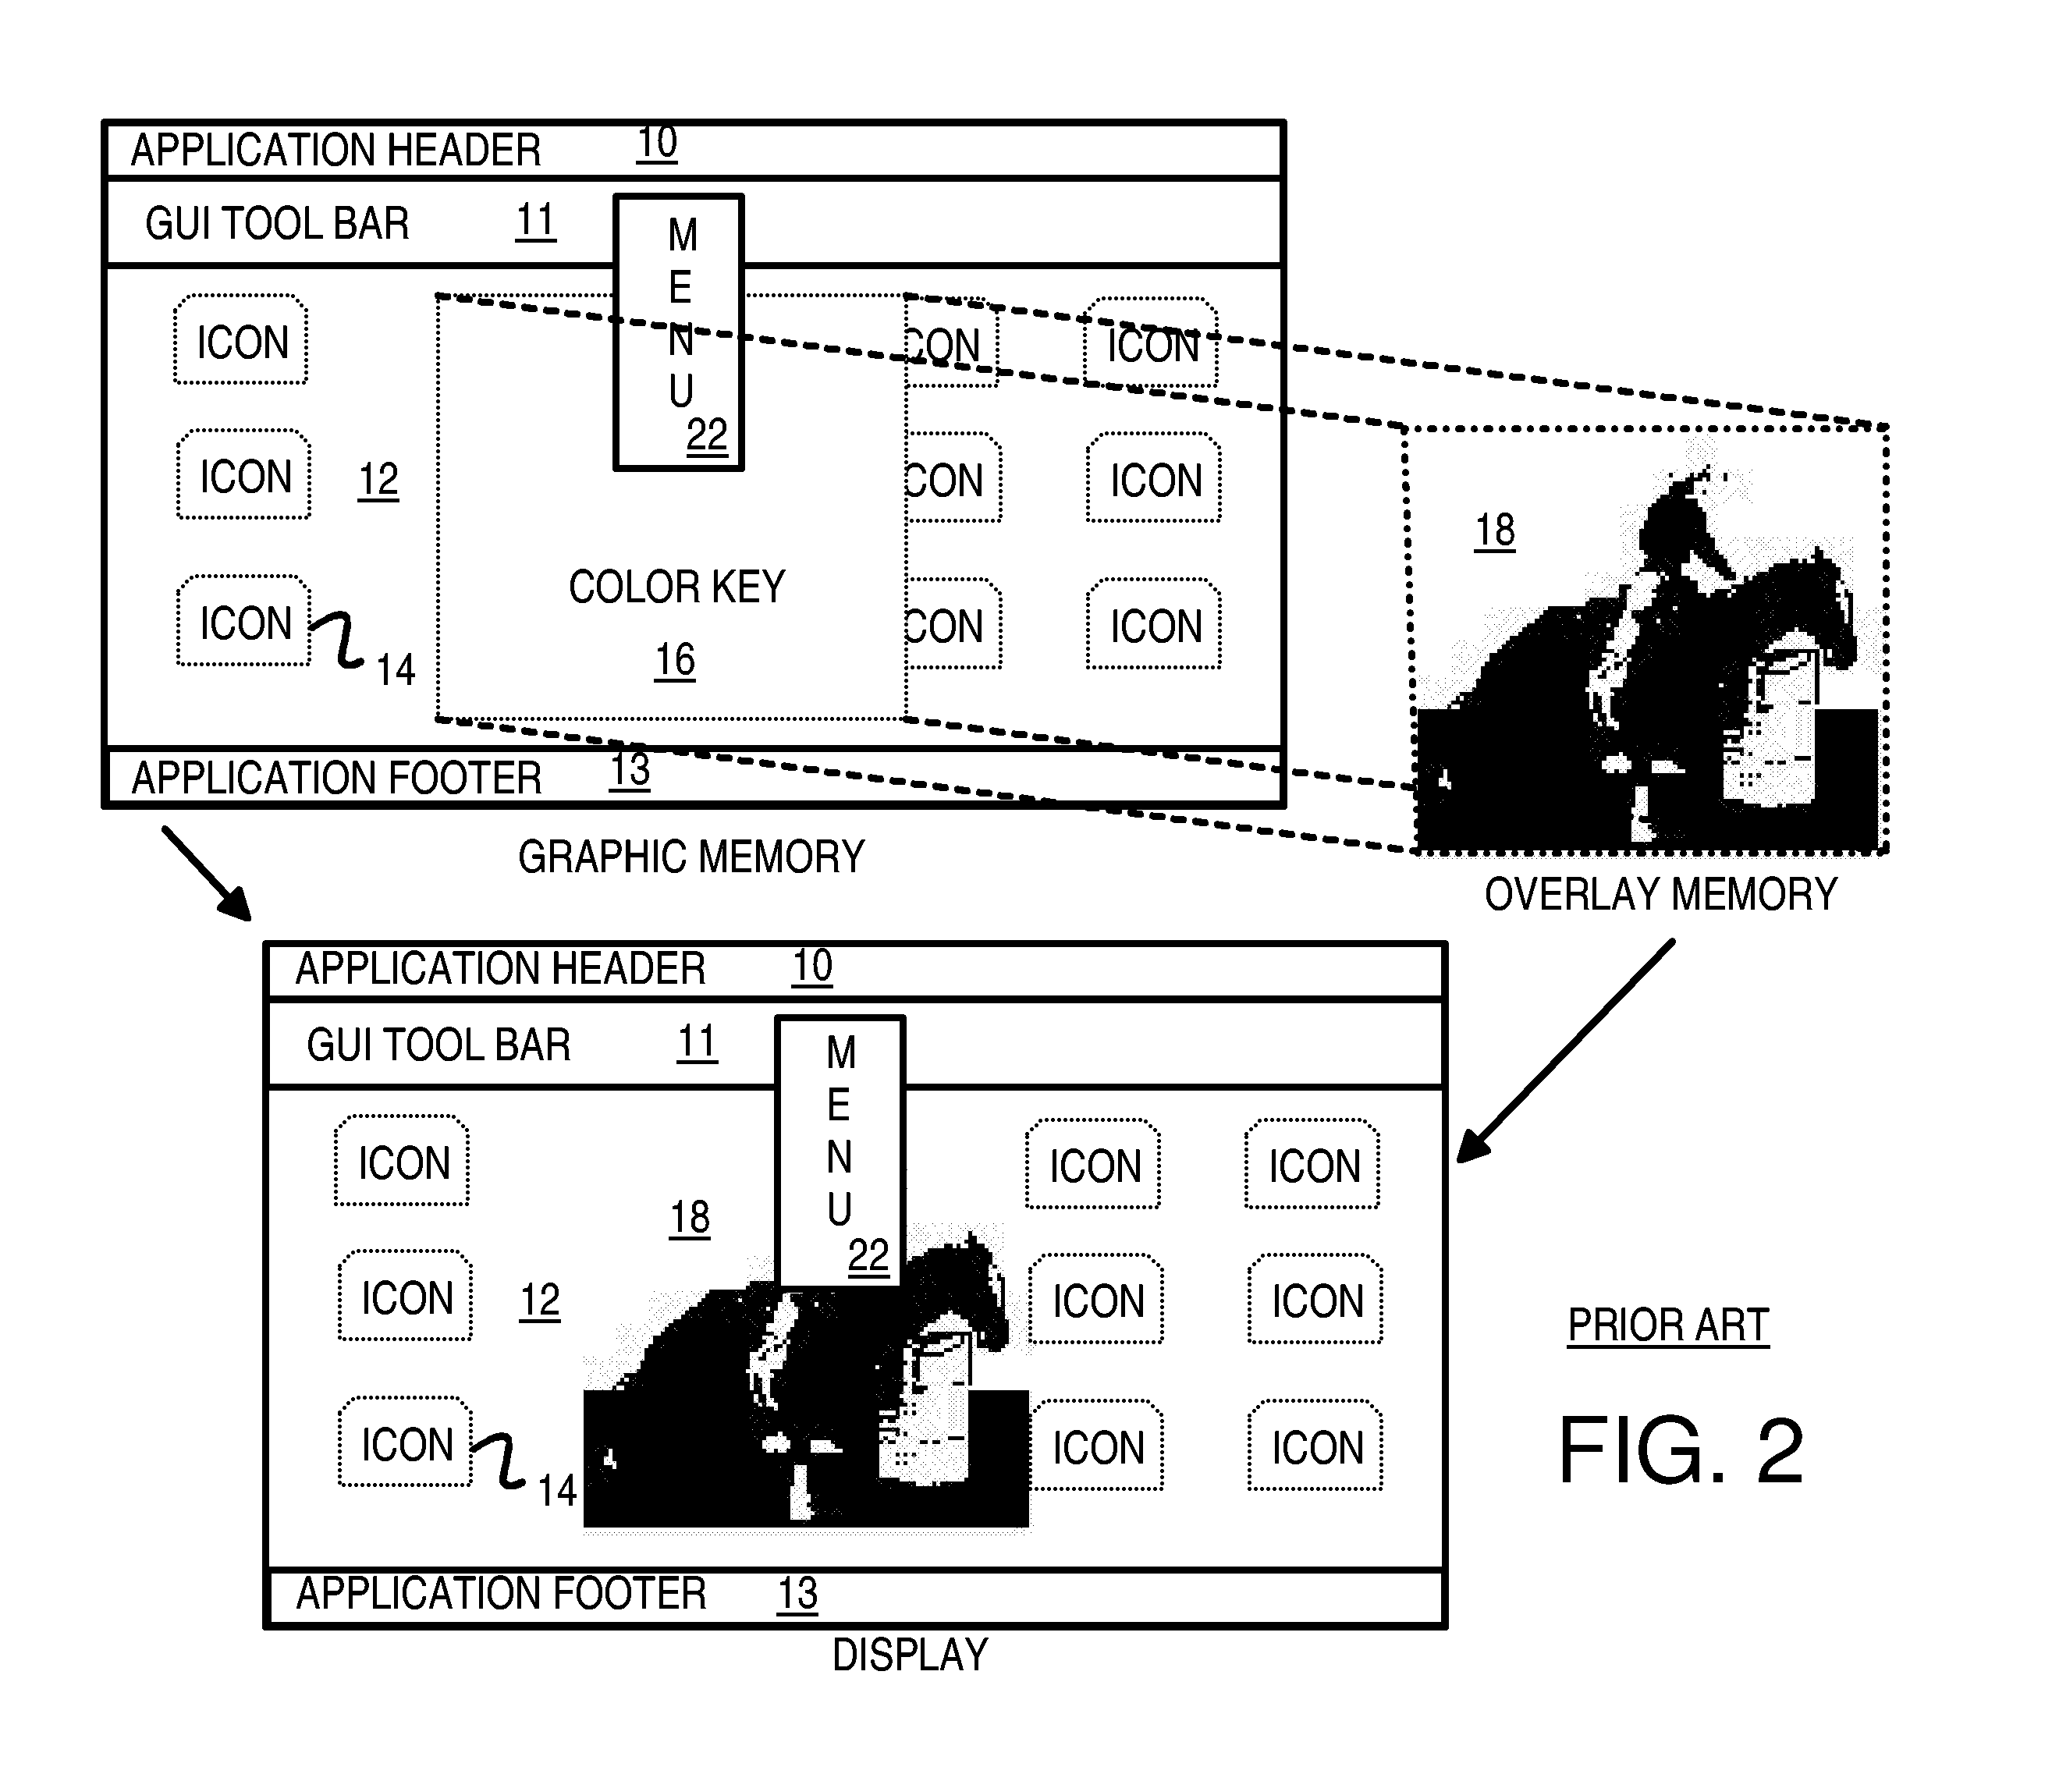 Complex-shaped video overlay using multi-bit row and column index registers